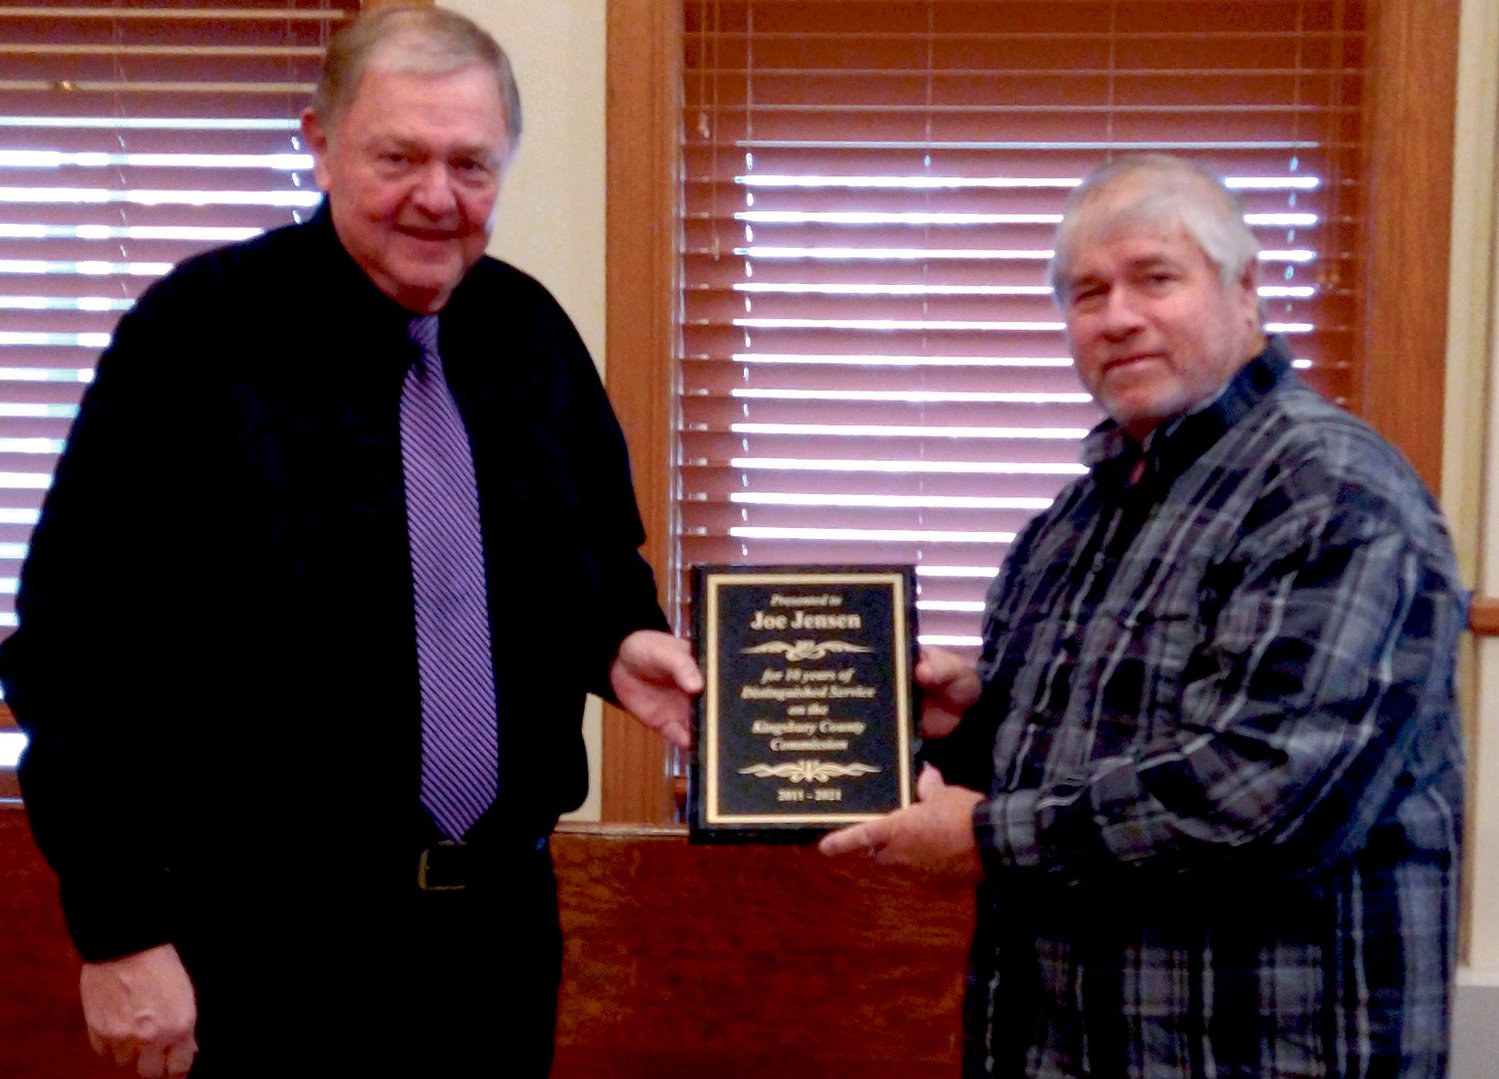 Kingsbury County Commissioner Joe Jensen, left, receives a plaque of appreciation for his 10 years of service from Commission Chairman, Roger Walls, Tuesday. This was Commissioner Jensen’s last day on the board.